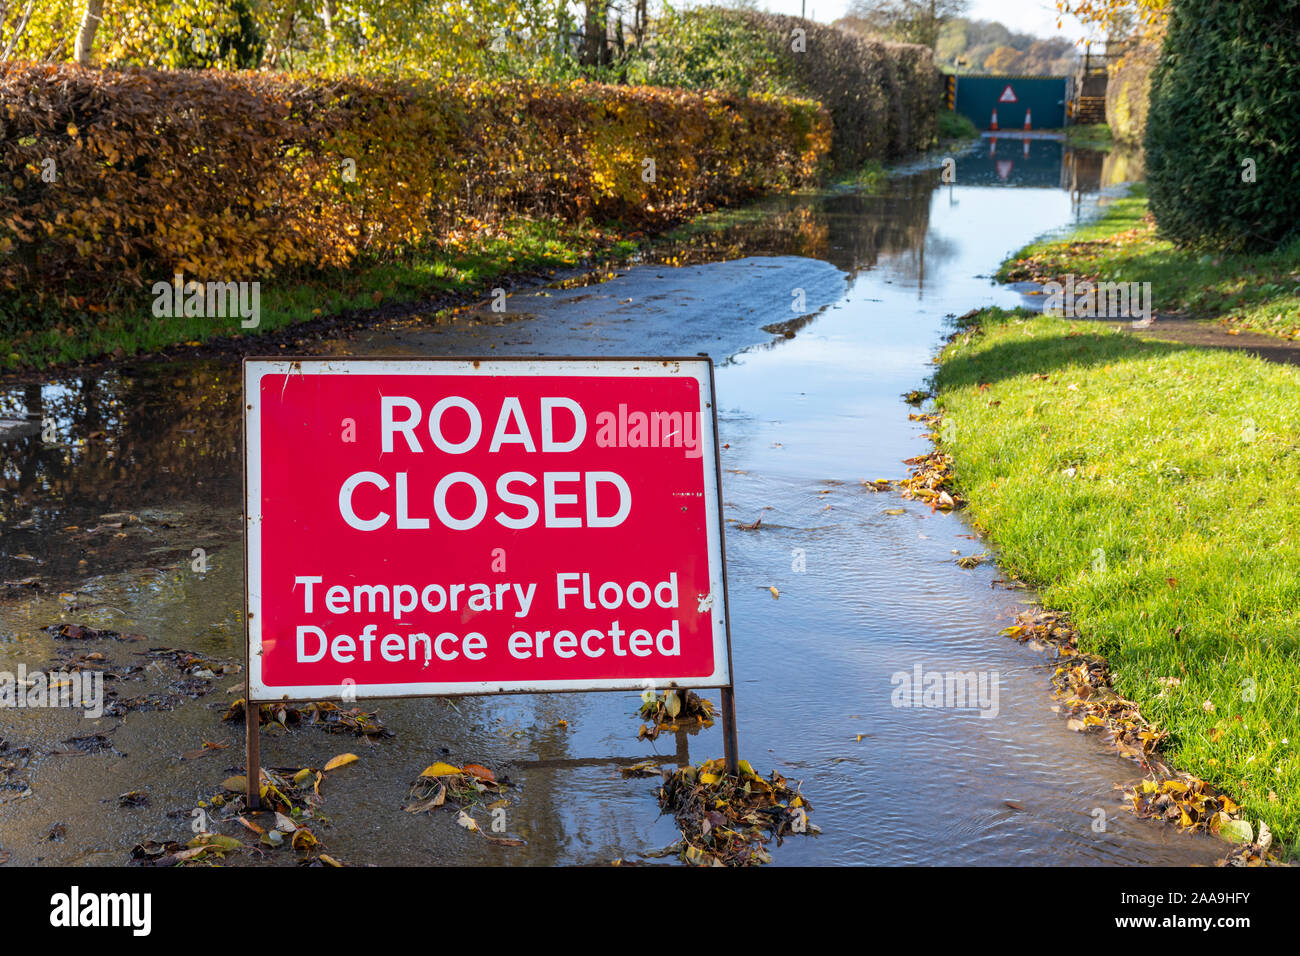 A flood gate in the Severn Vale holding back the River Severn at Deerhurst, Gloucestershire UK on 18/11/2019 Stock Photo